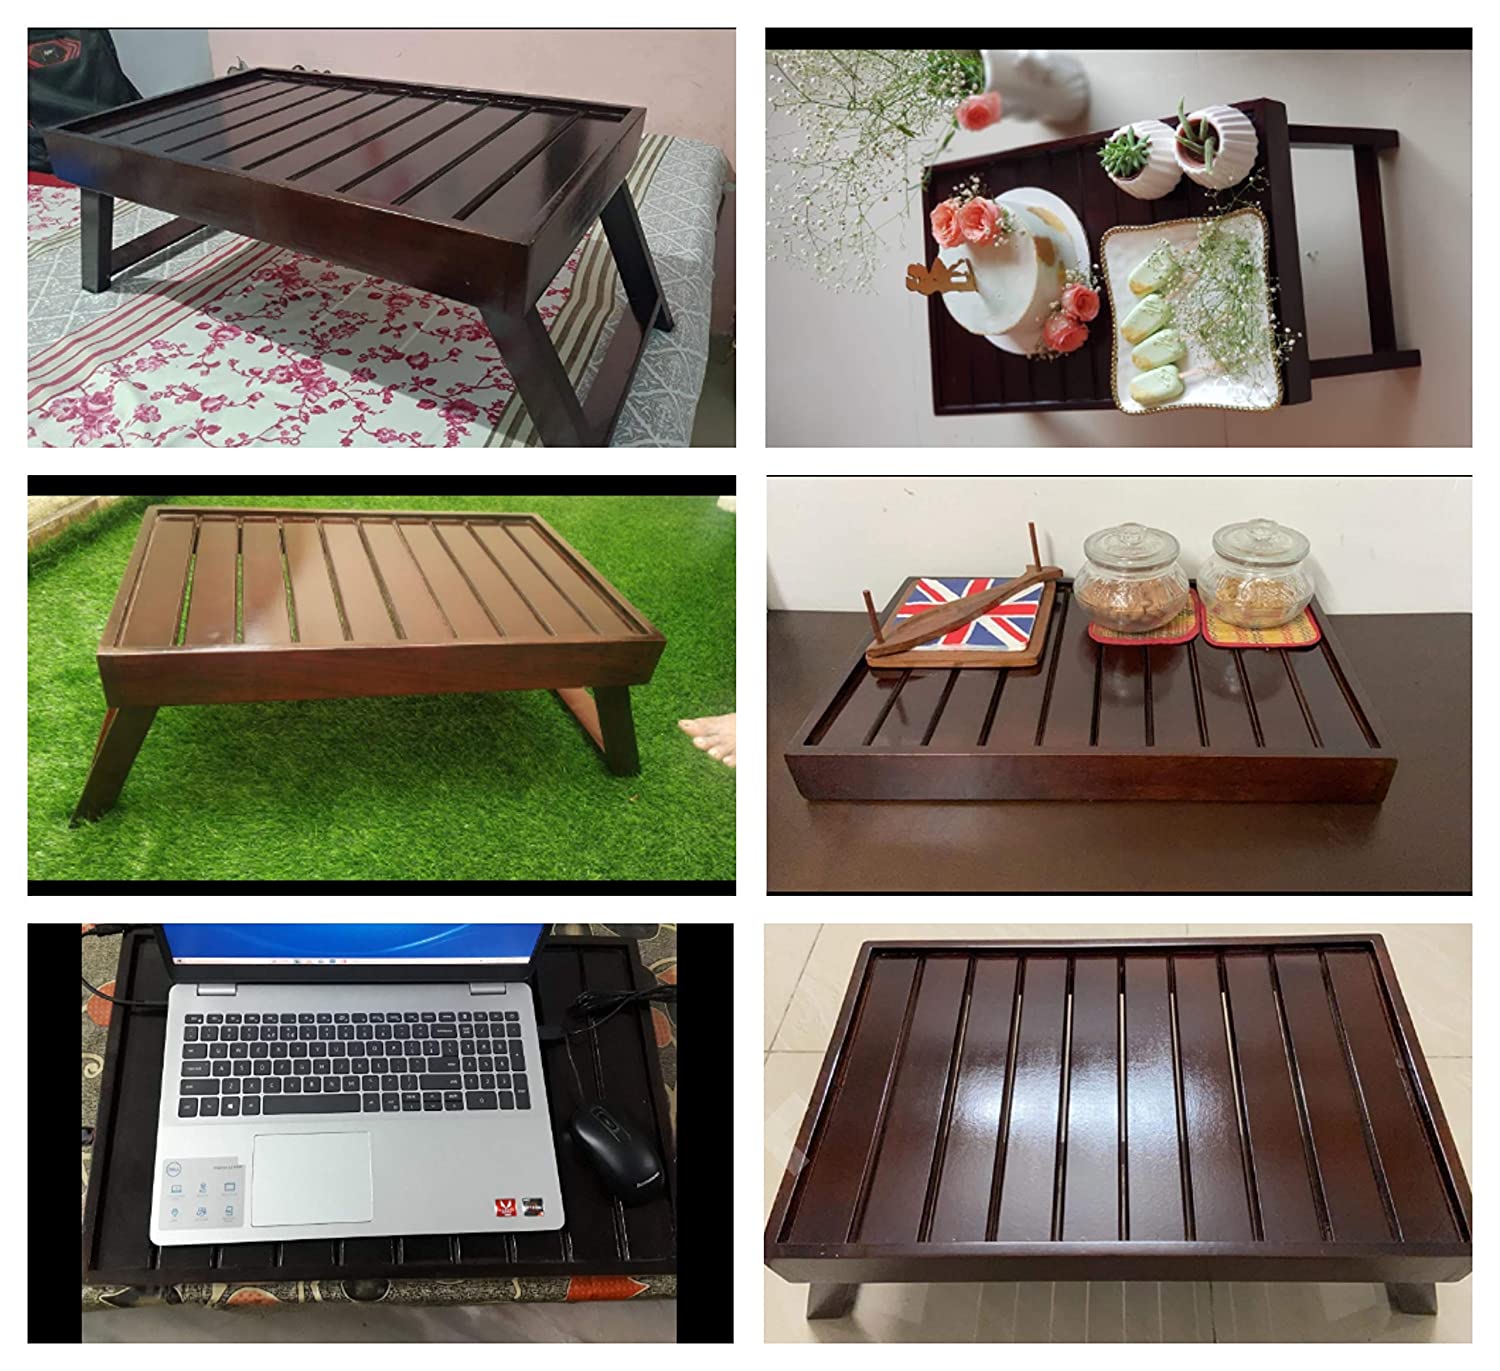 Wooden Multipurpose Portable Table Breakfast Tray| Laptop Stand Bed Side Table